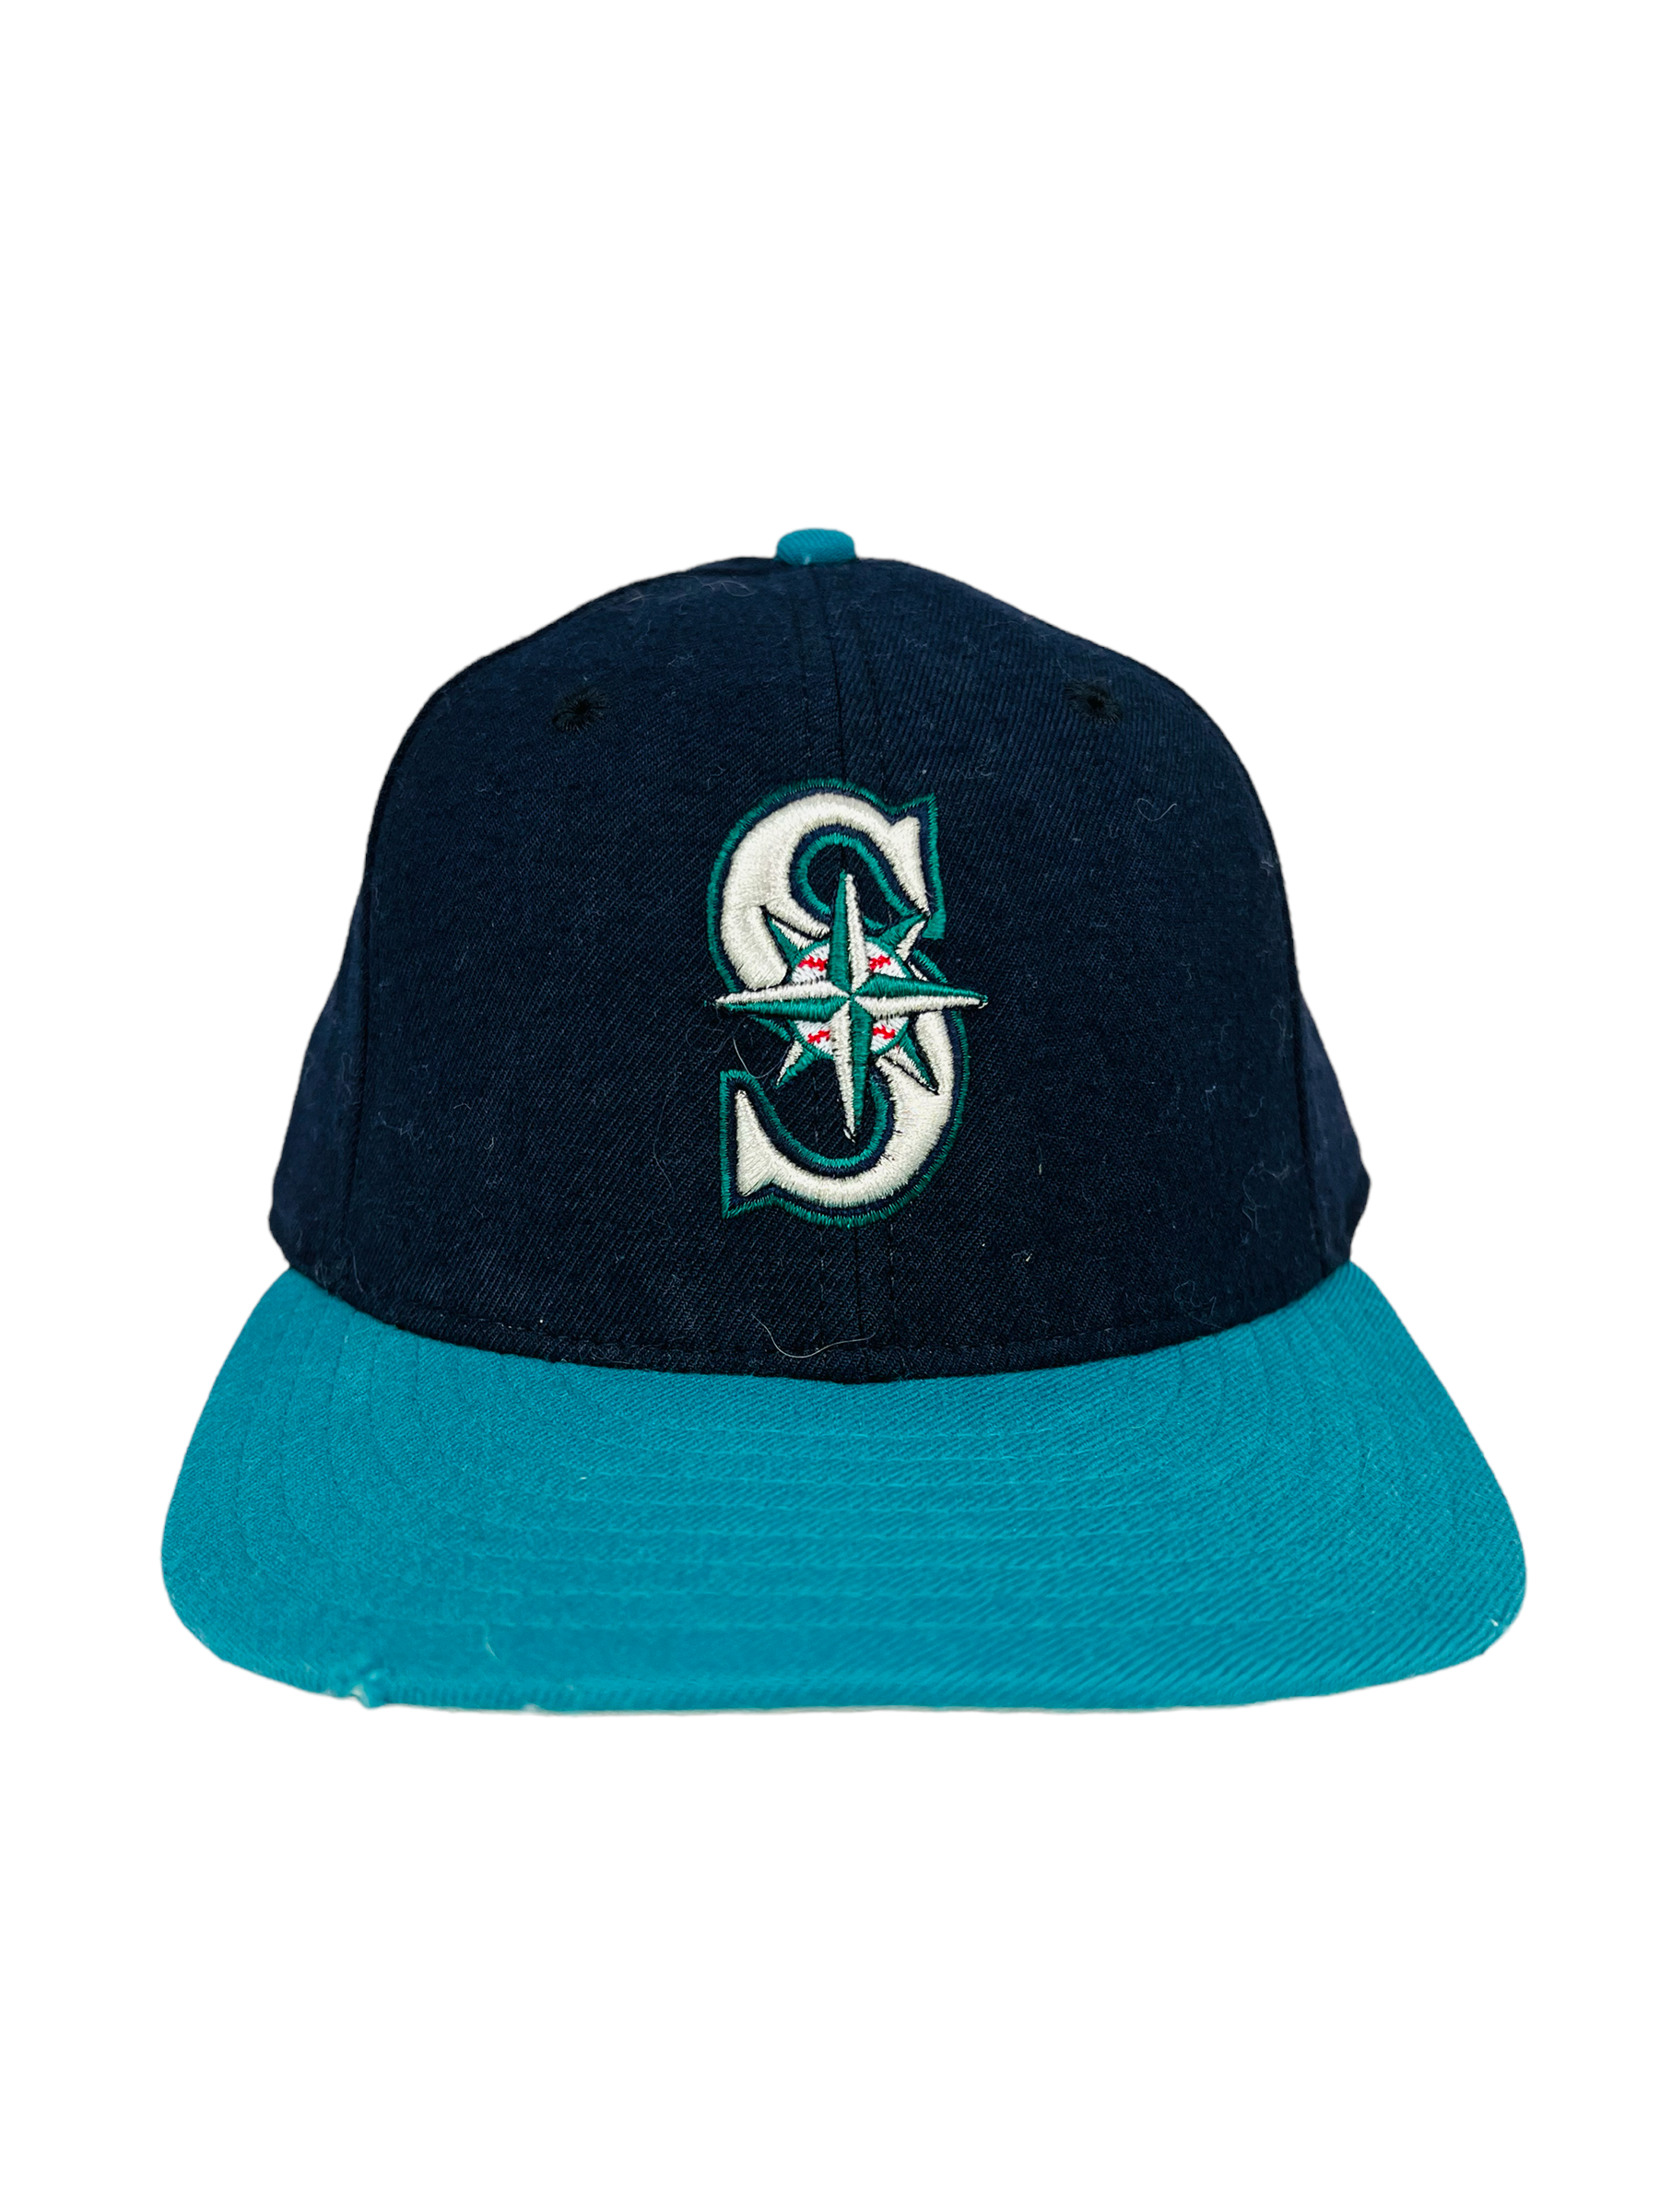 New Era Shop All Seattle Mariners in Seattle Mariners Team Shop 